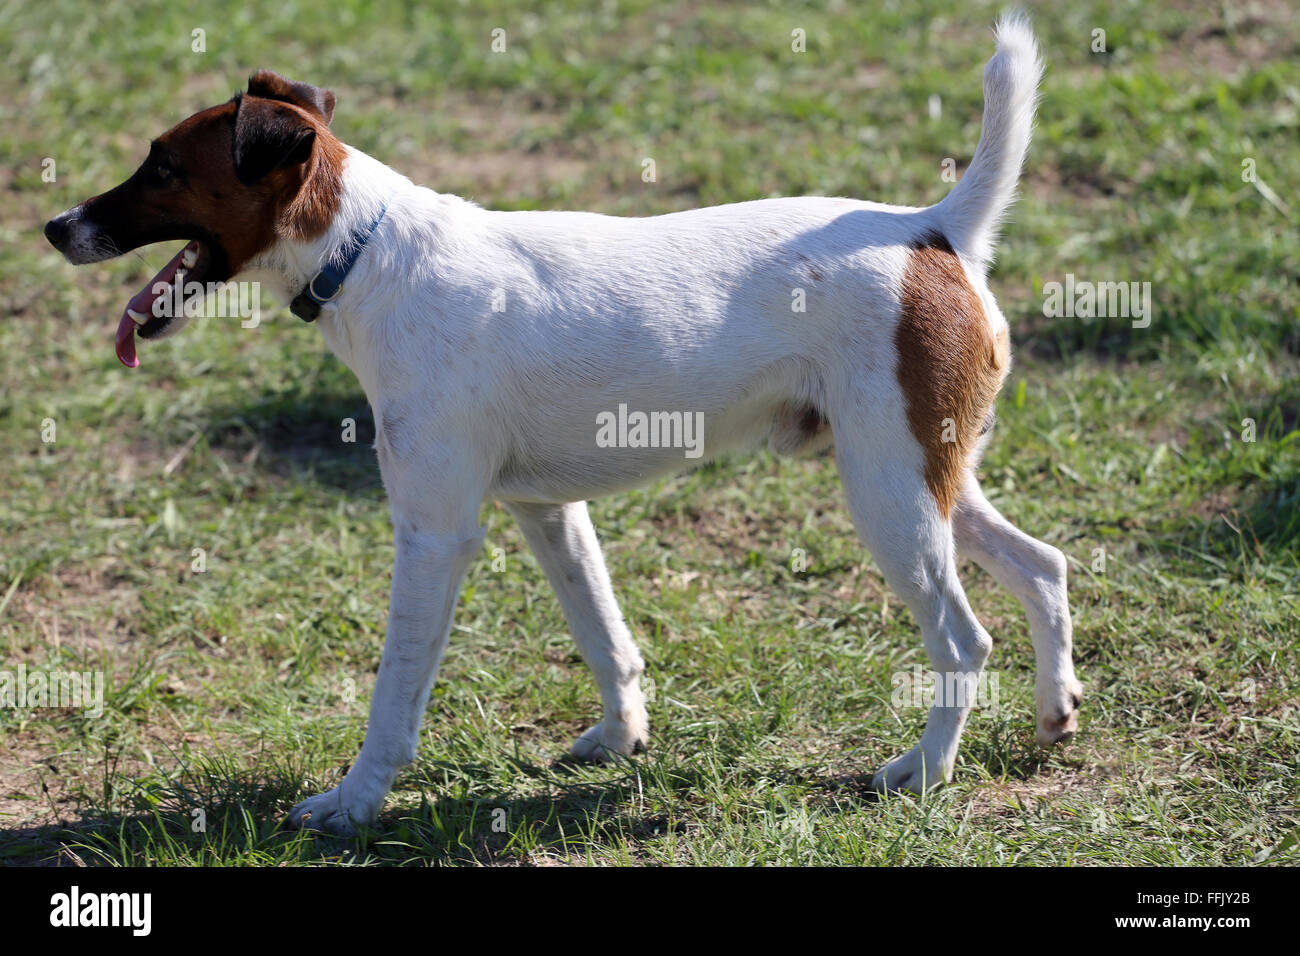 Clever purebred fox terrier standing on a racetrack Stock Photo - Alamy